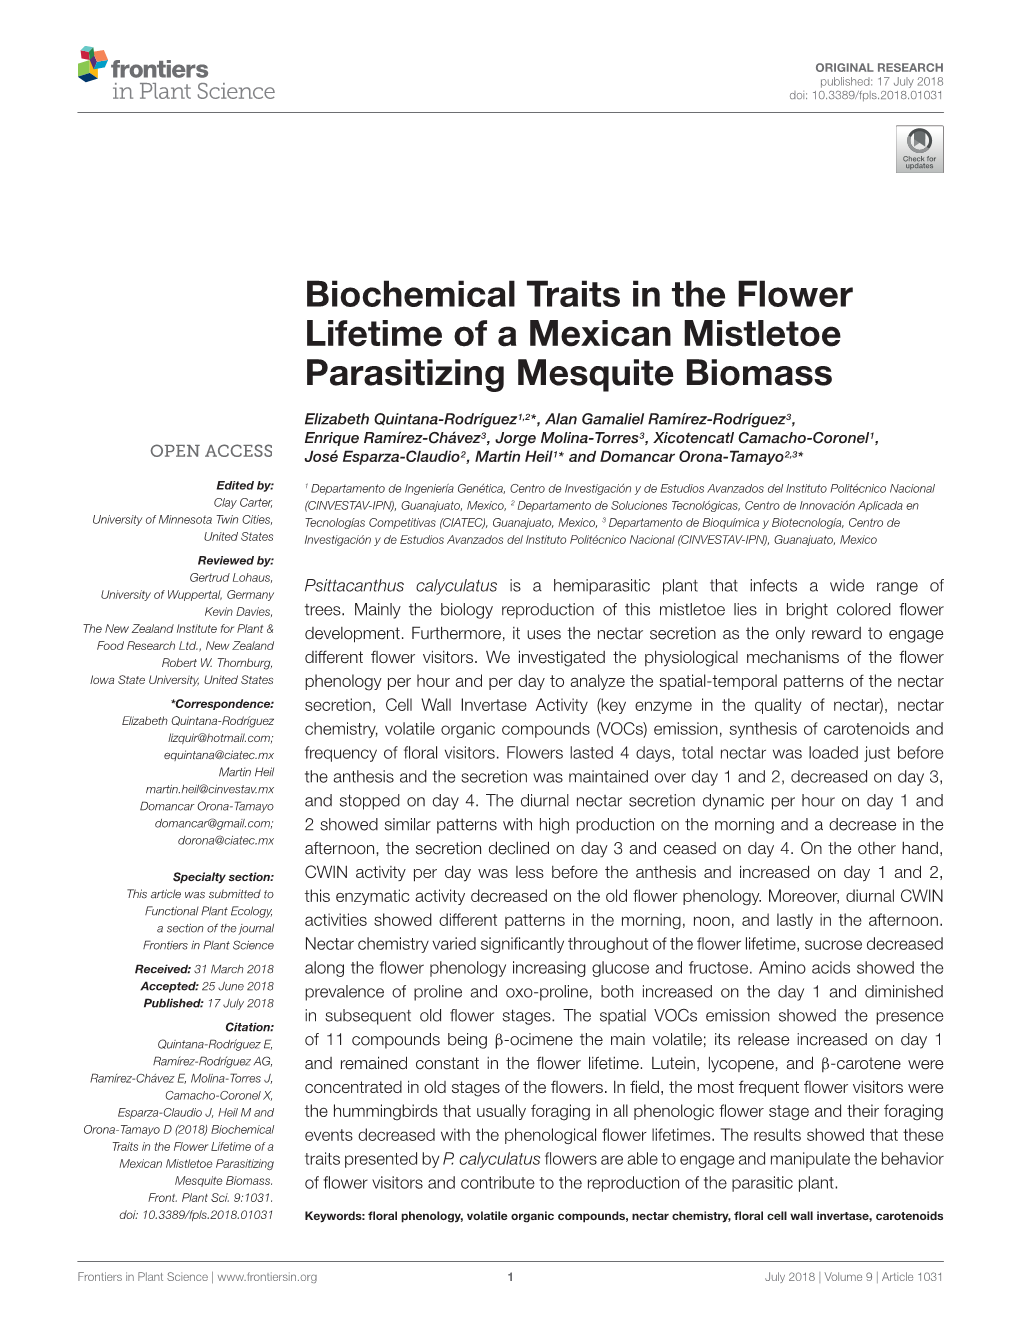 Biochemical Traits in the Flower Lifetime of a Mexican Mistletoe Parasitizing Mesquite Biomass